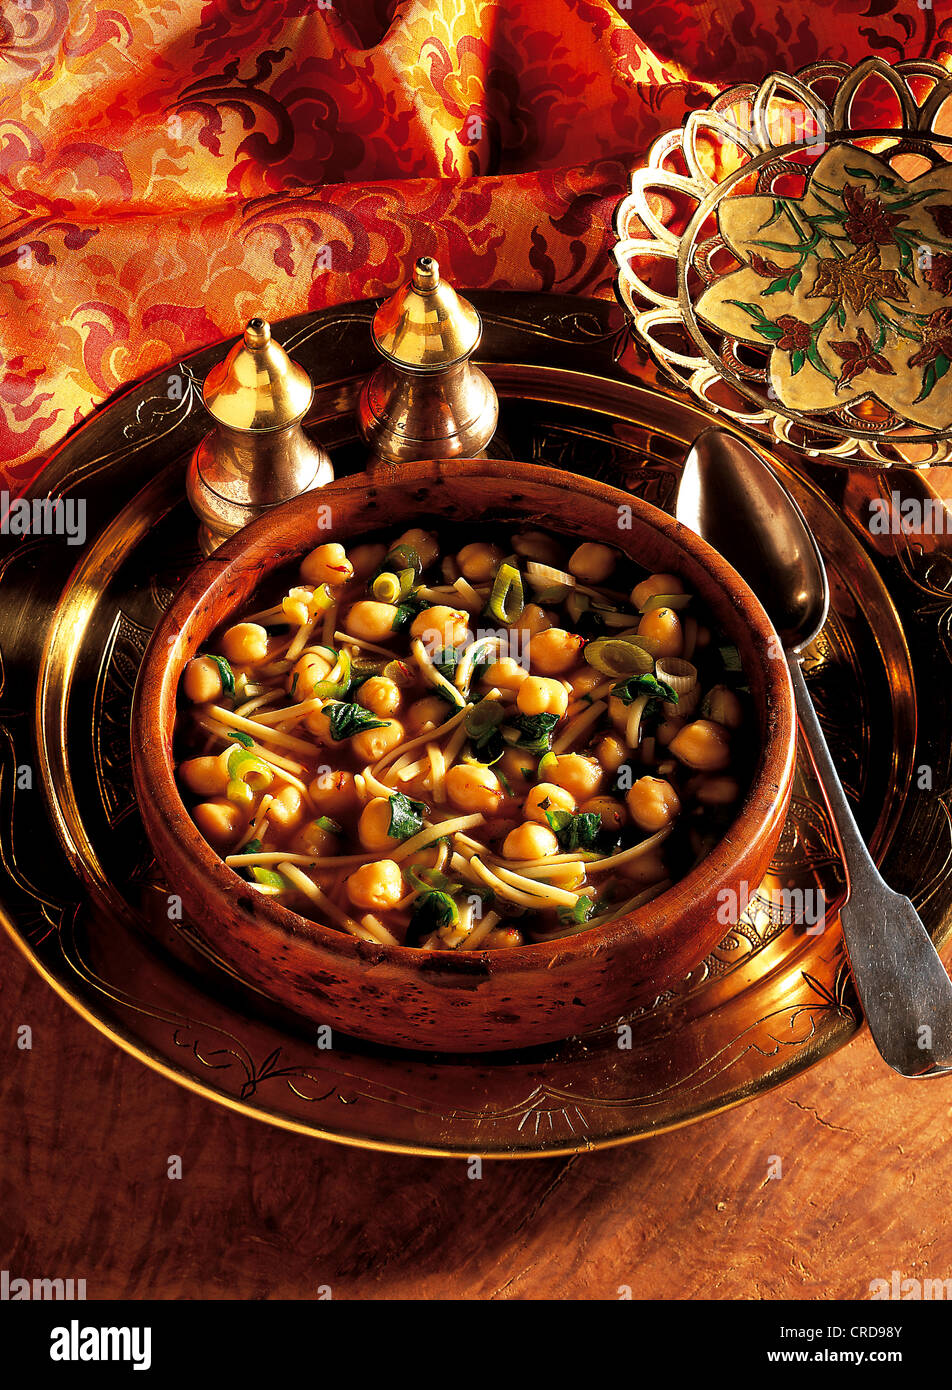 Chickpea soup with noodles, vegetarian stew, Egypt. Stock Photo